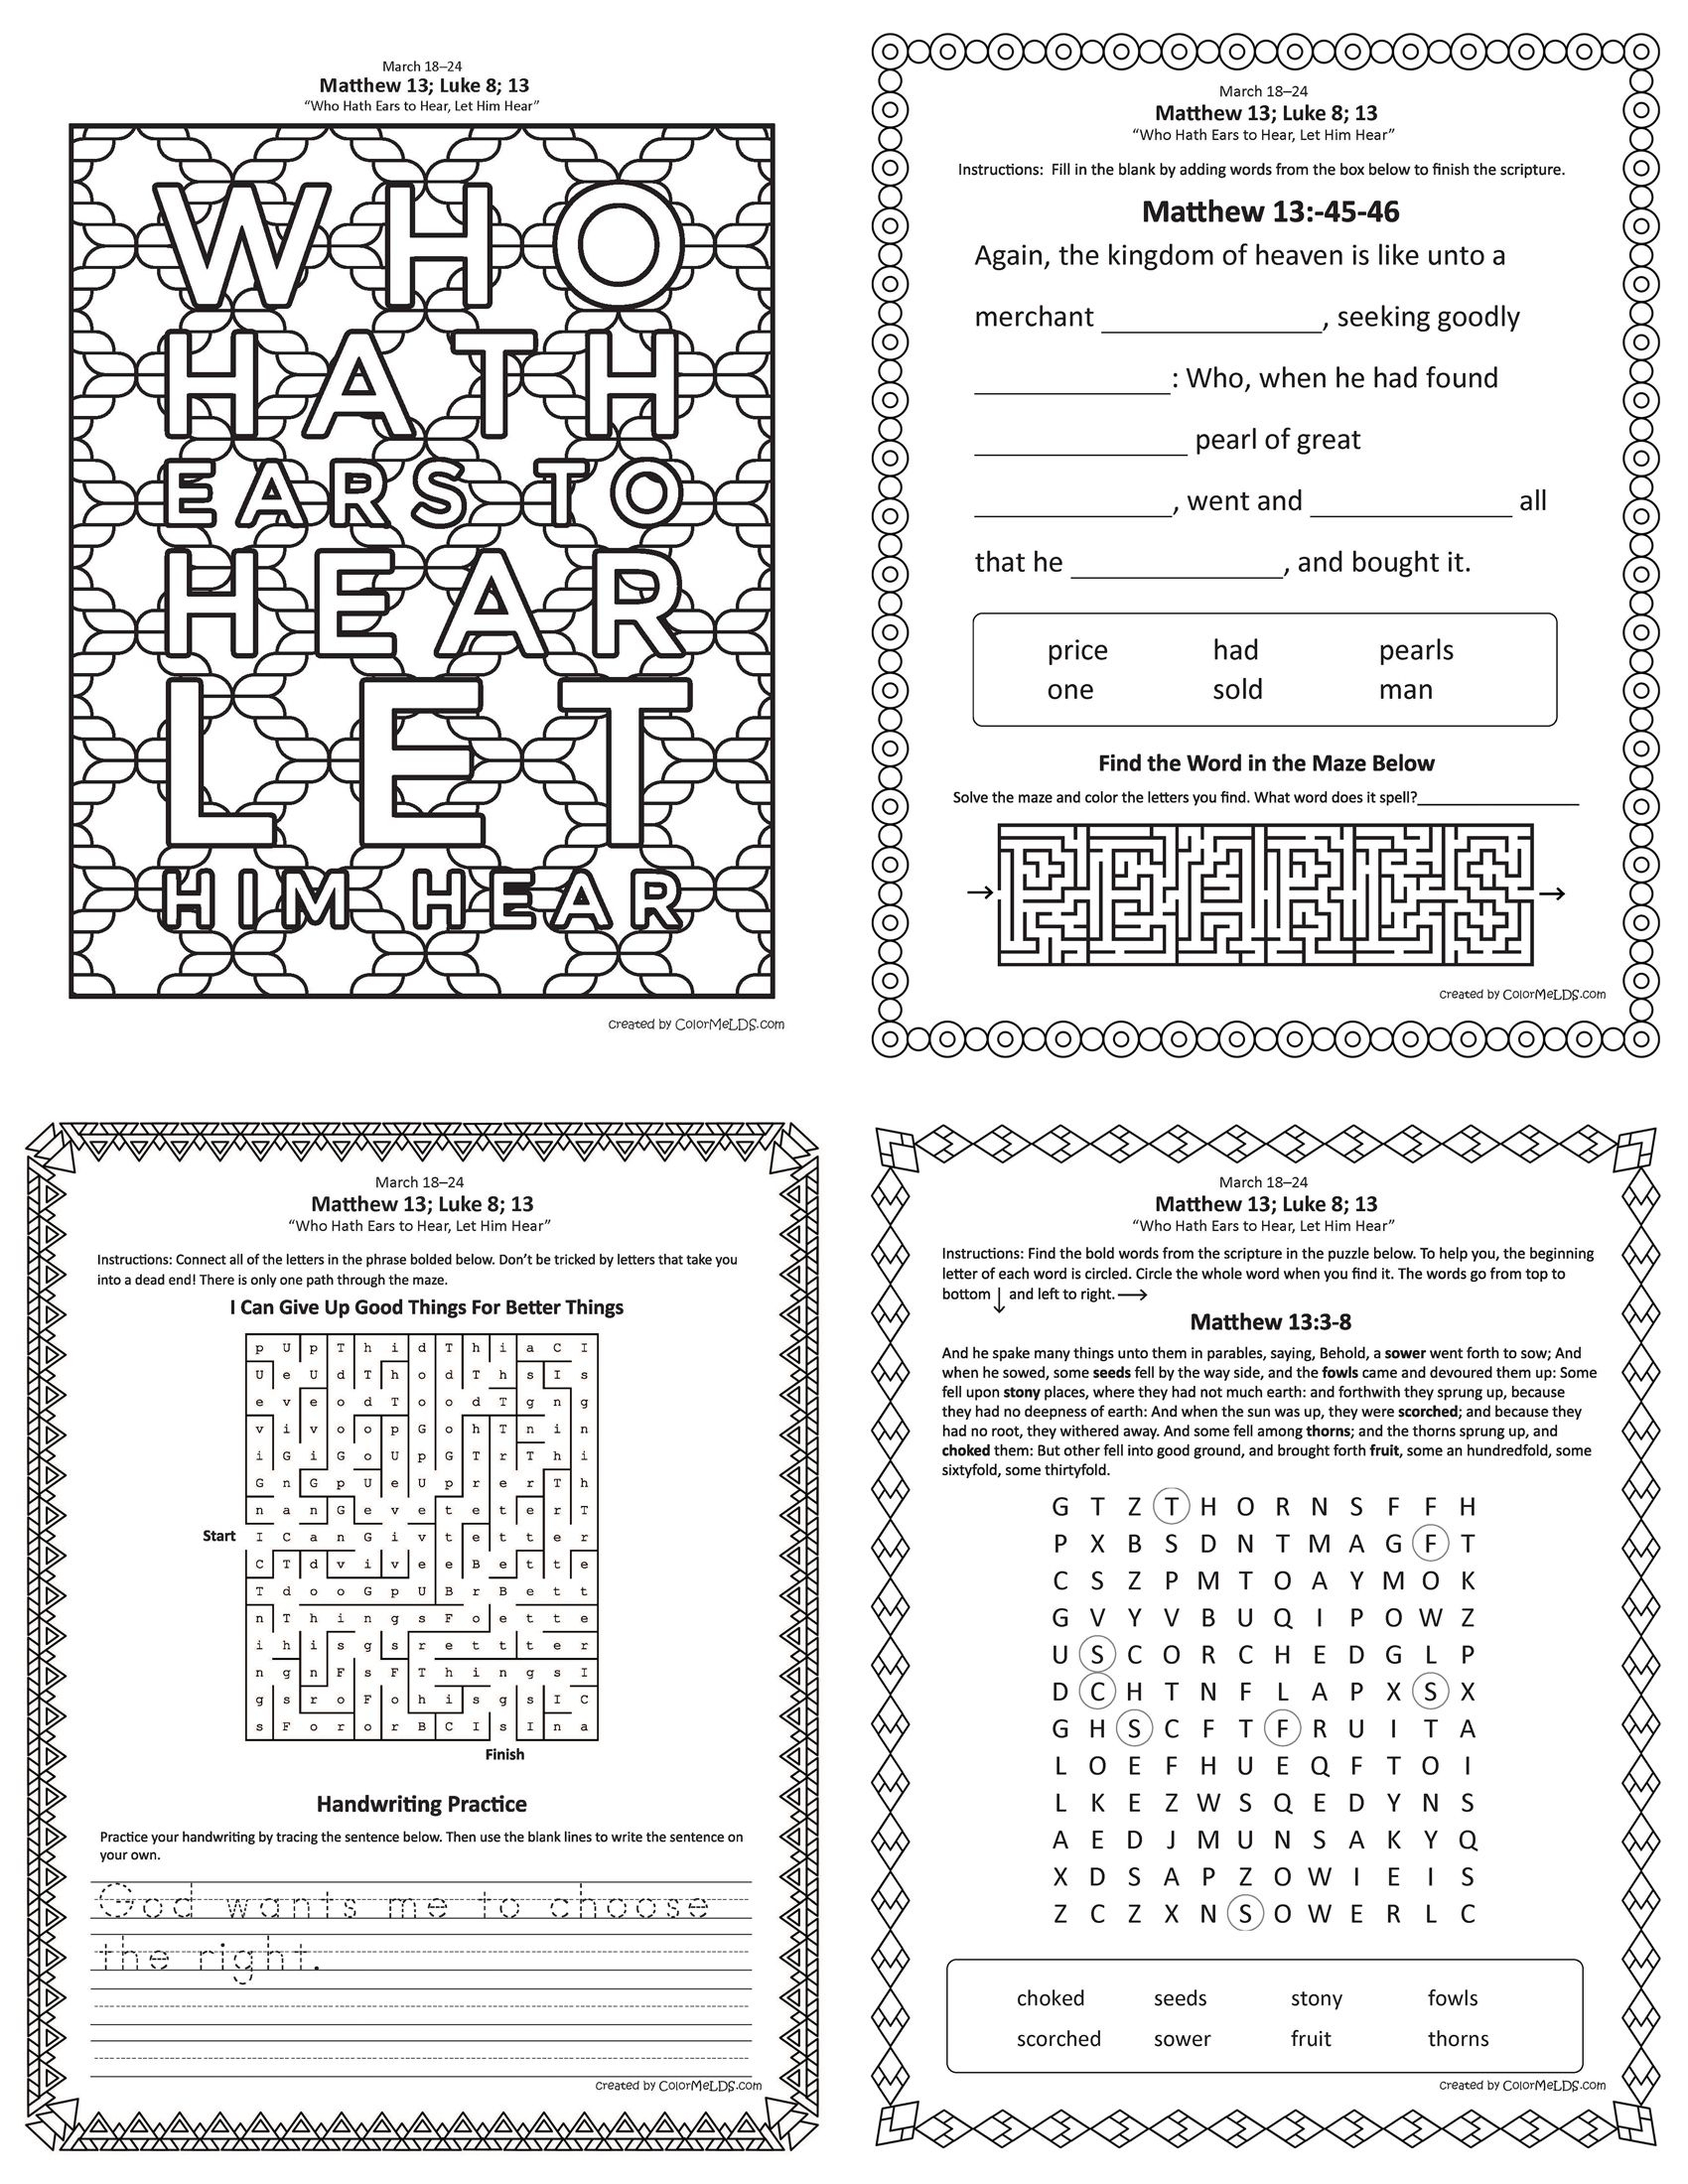 Free Lds Worksheets And Printables - Word Crumb Mazes, Word